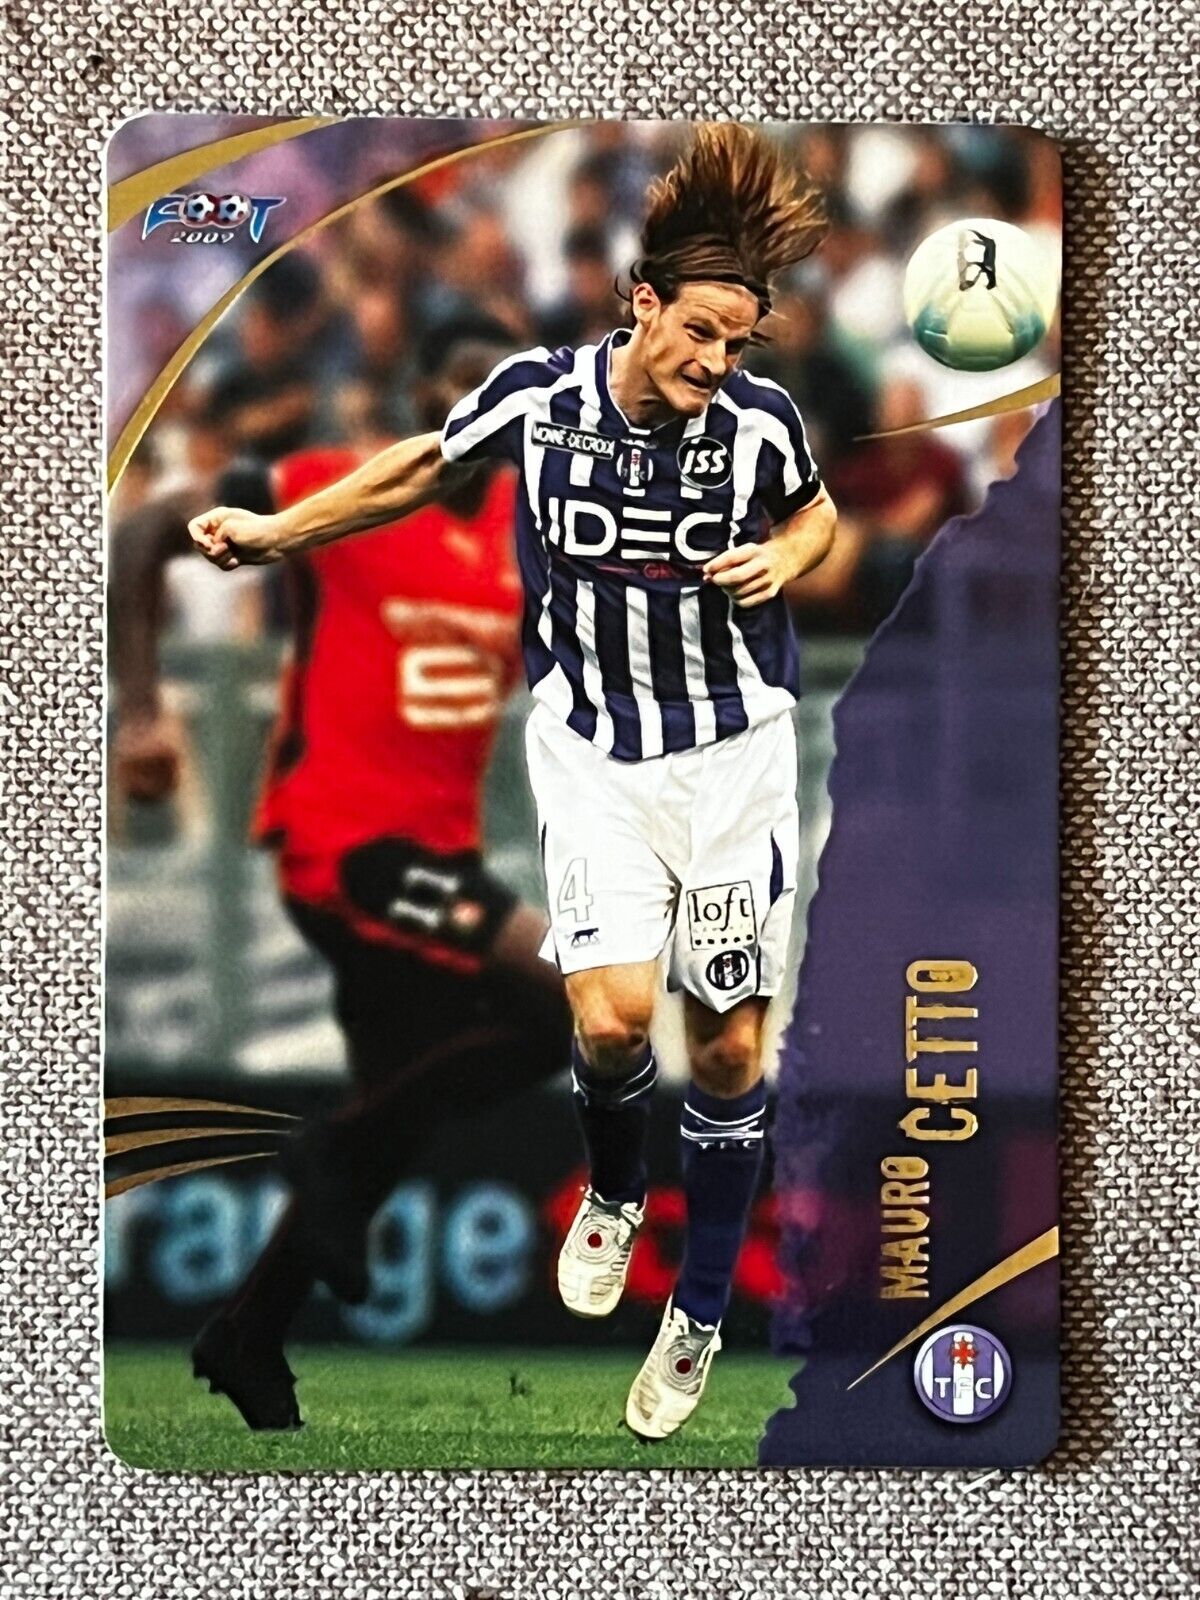 RARE PANINI CARD ADRENALYN FOOT 2009 MAURO CETTO TOULOUSE # 110 MINT